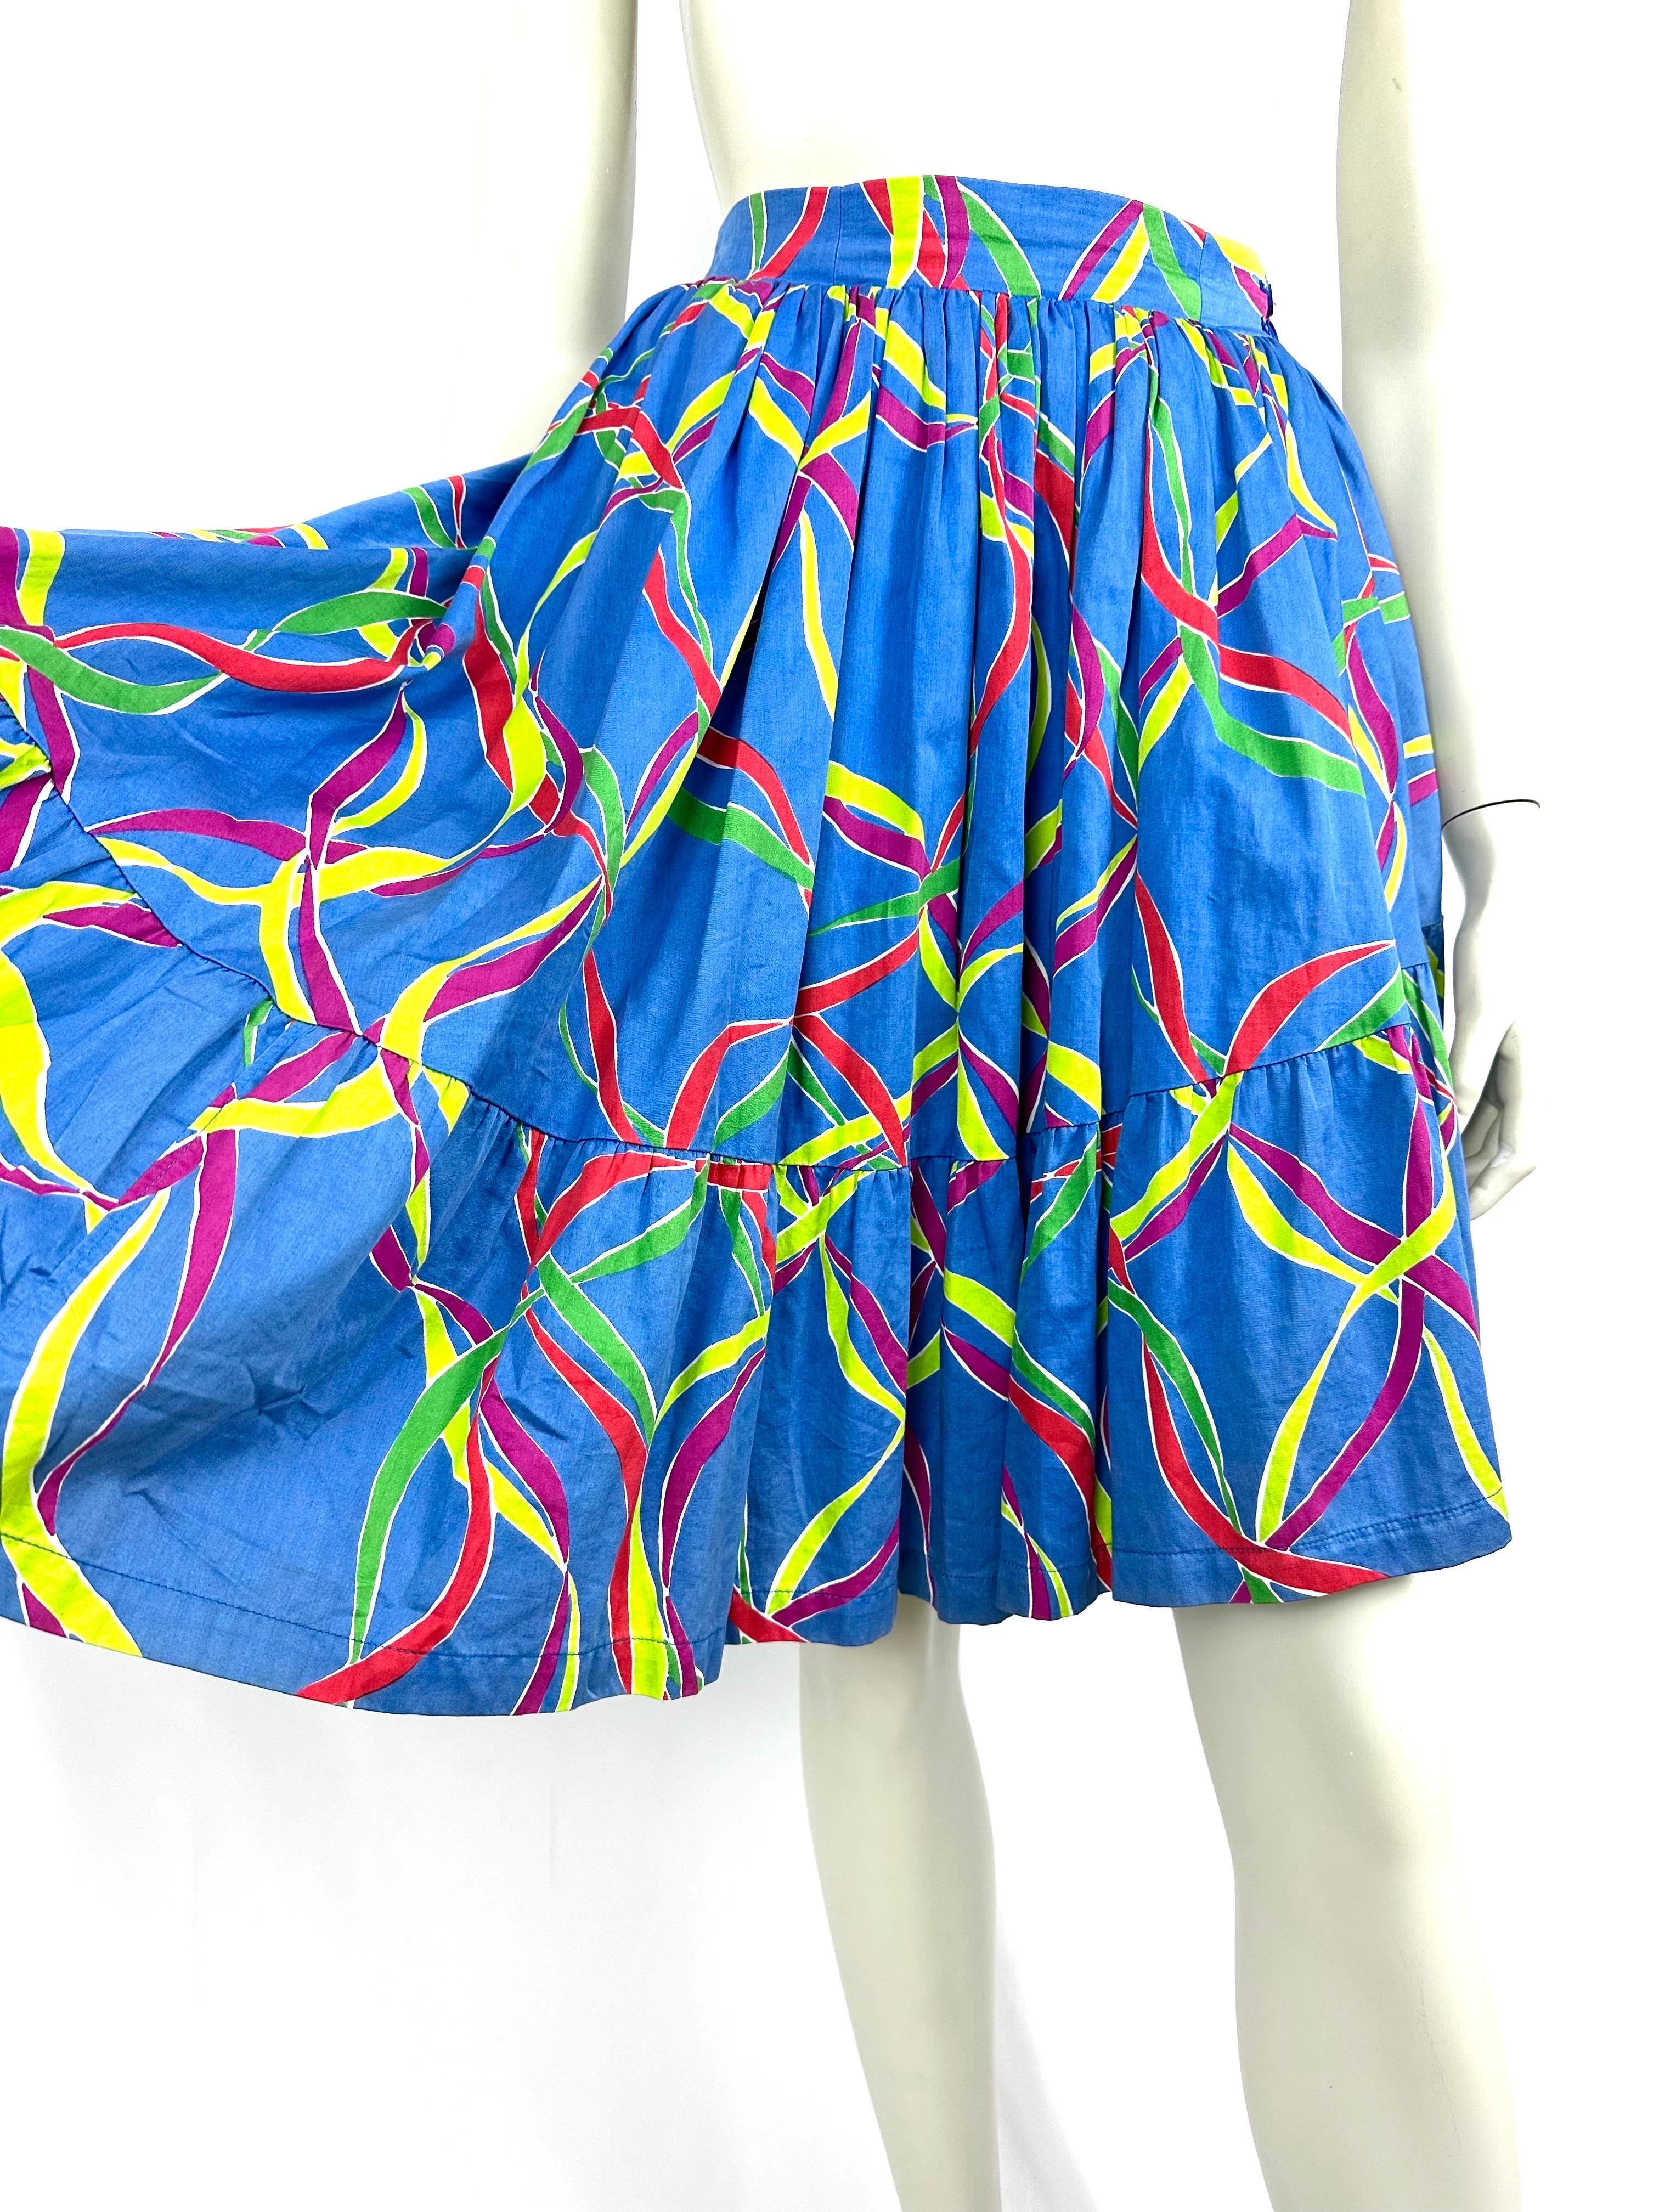 Vintage Yves Saint Laurent Rive gauche skirt from the S/S 1991 collection.
Pretty colorful patterns on a blue background.
Asymmetric,
High and narrow waist, nicely pleated for a very nice volume.
discreet zipper on the hip ending with 2